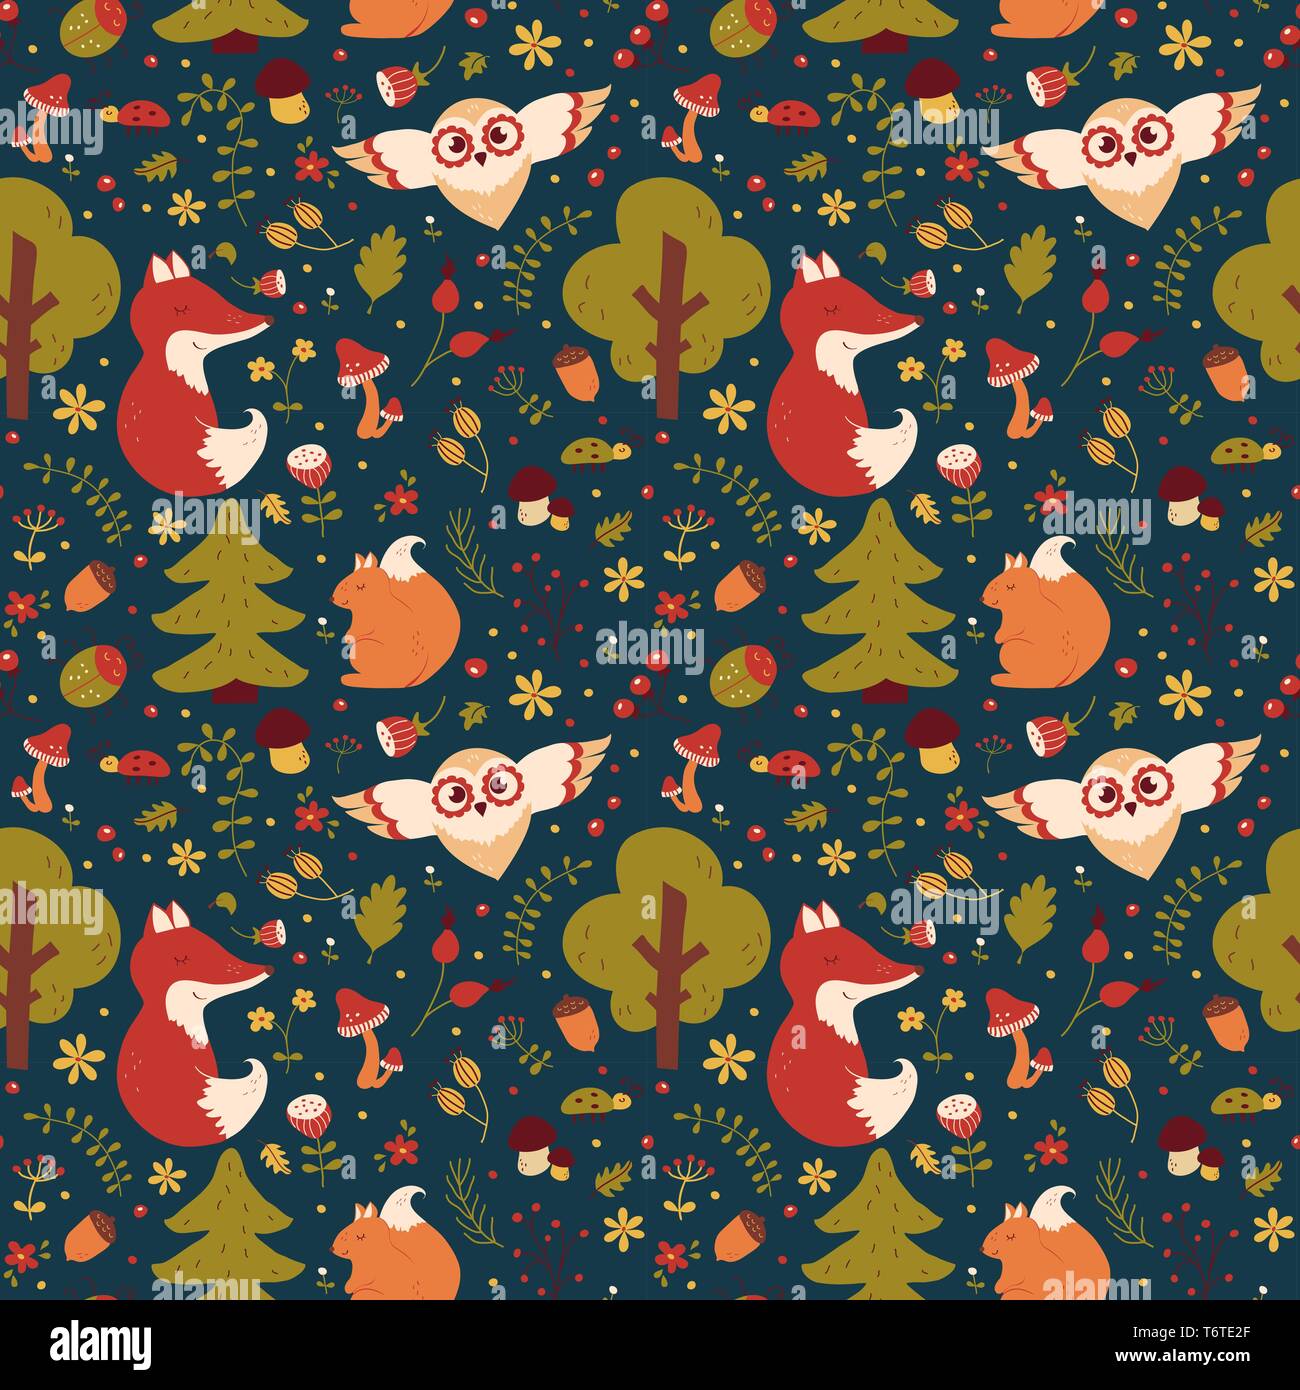 Forest seamless pattern with hand drawn animals, flowers and plants. Cute nature textile in blue, green, red, orange and white colors. Vector backgrou Stock Vector